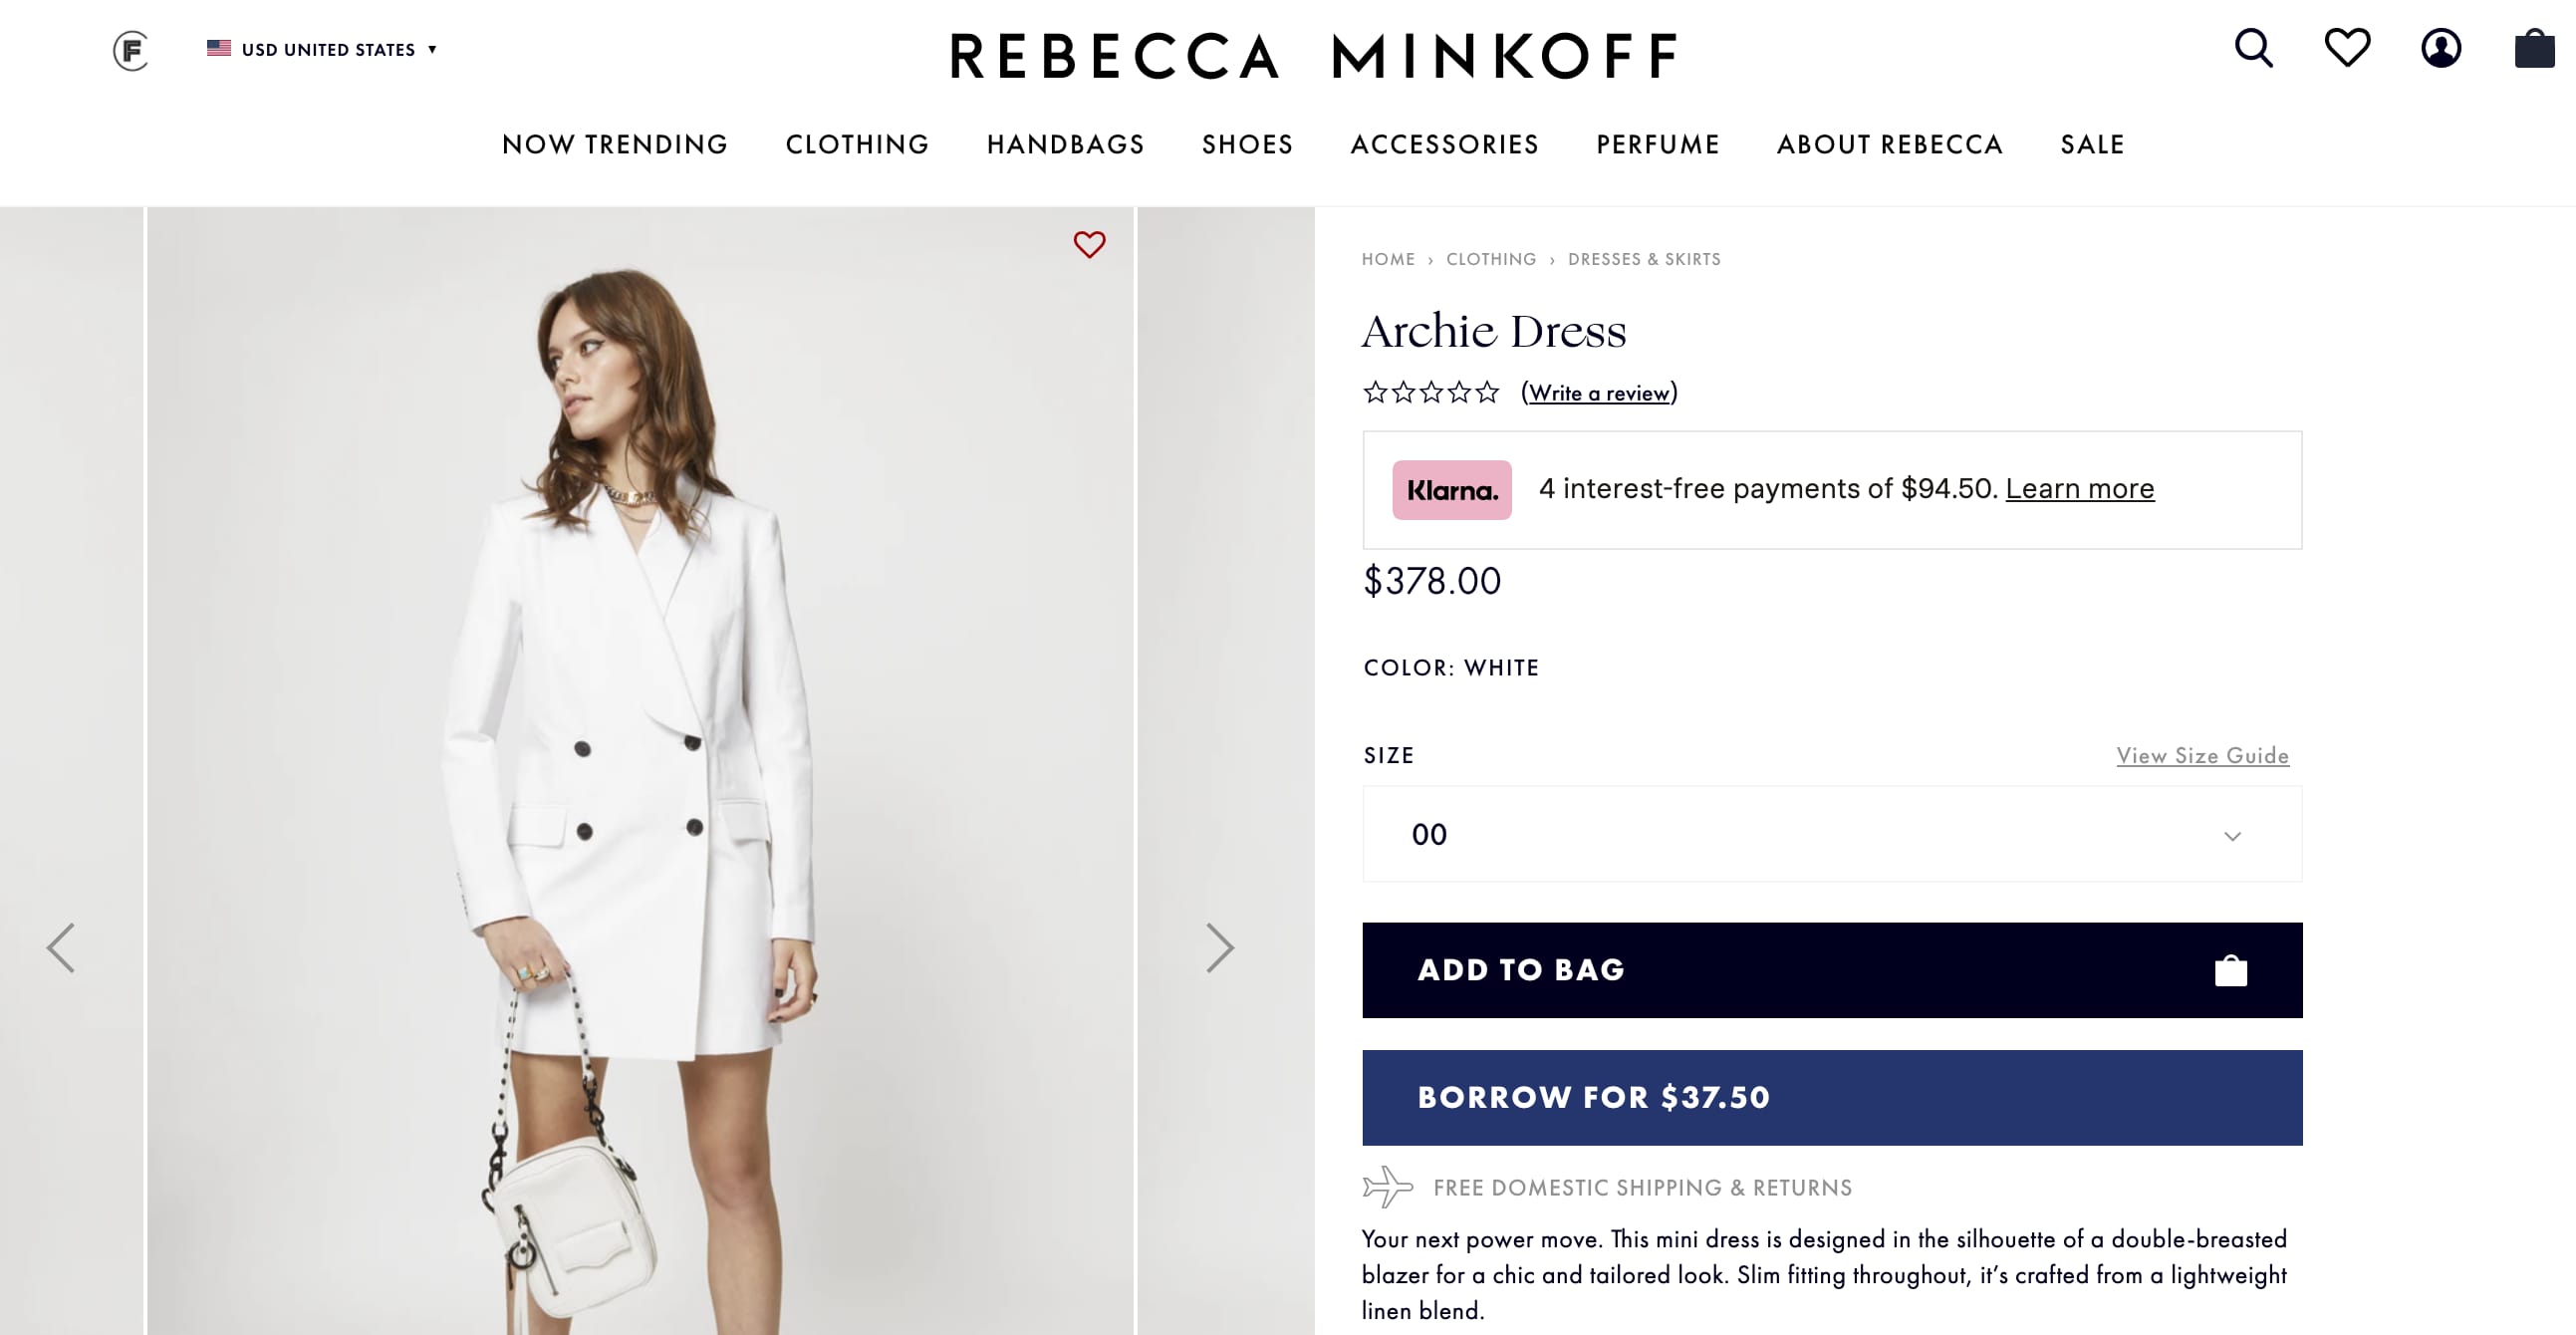 Retail brands including Rebecca Minkoff begin renting clothes without a subscription